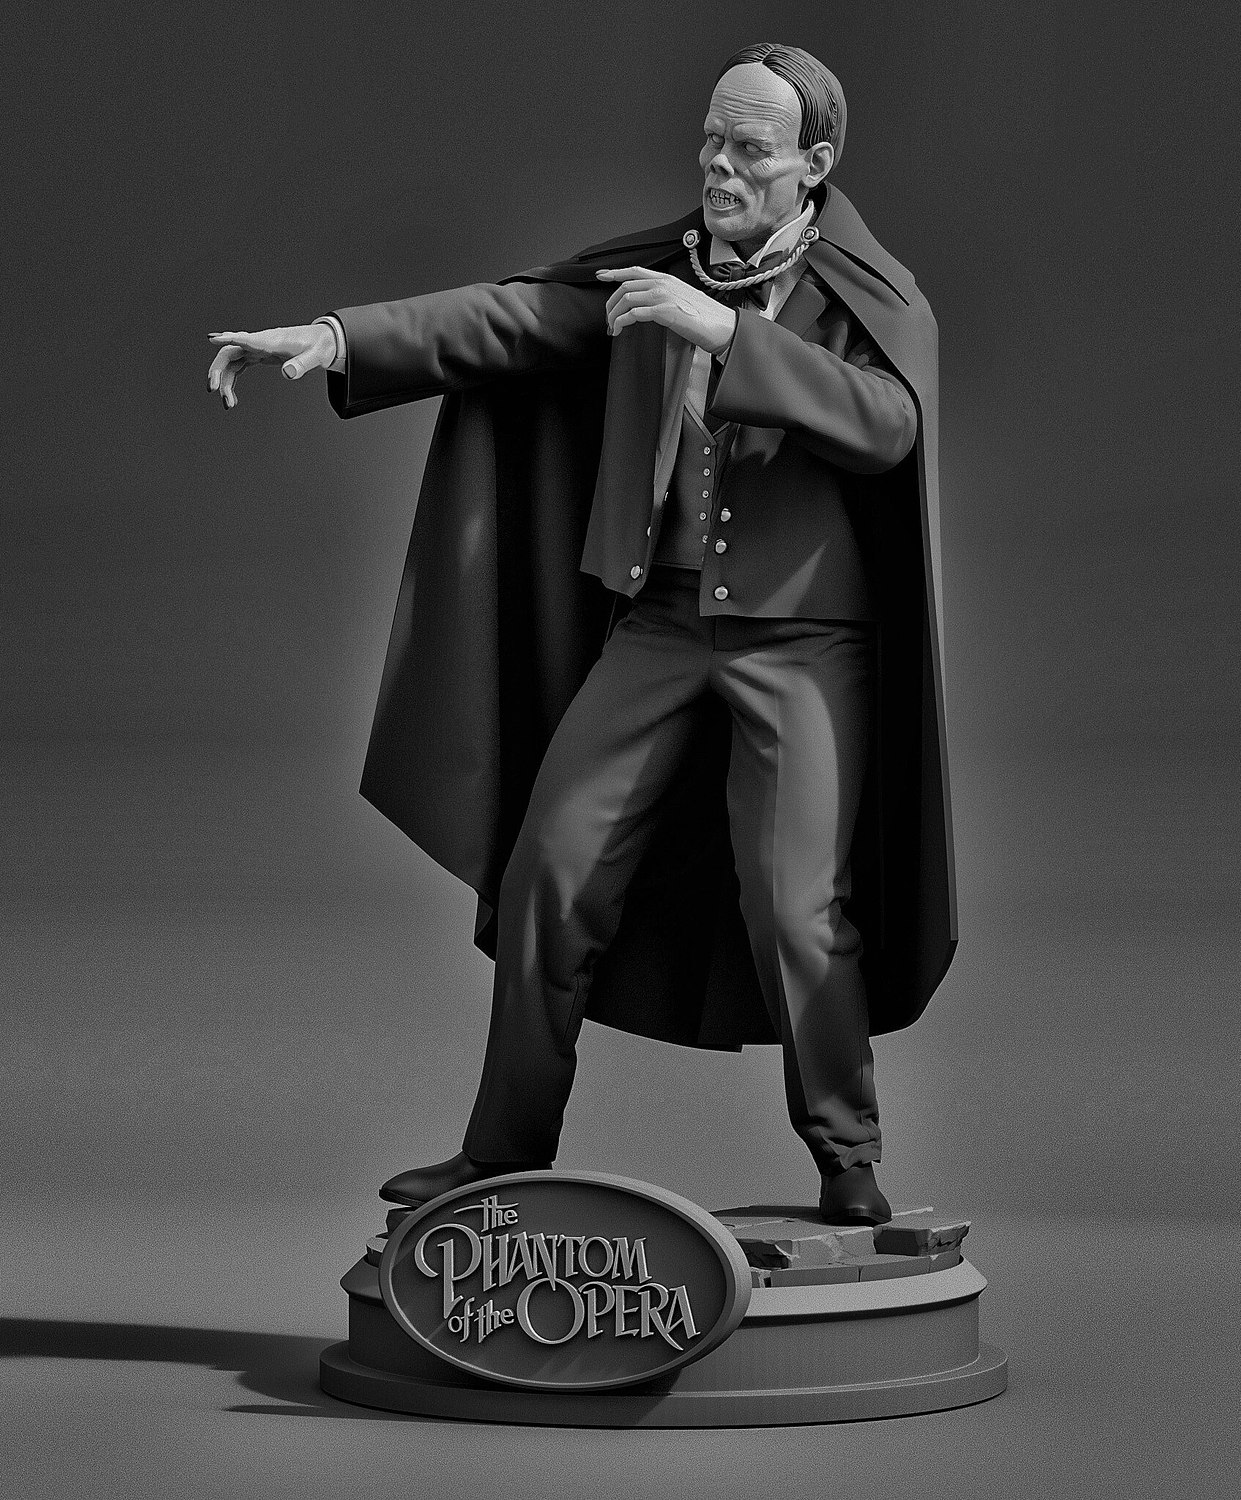 The Phantom of the Opera From Classic Monsters